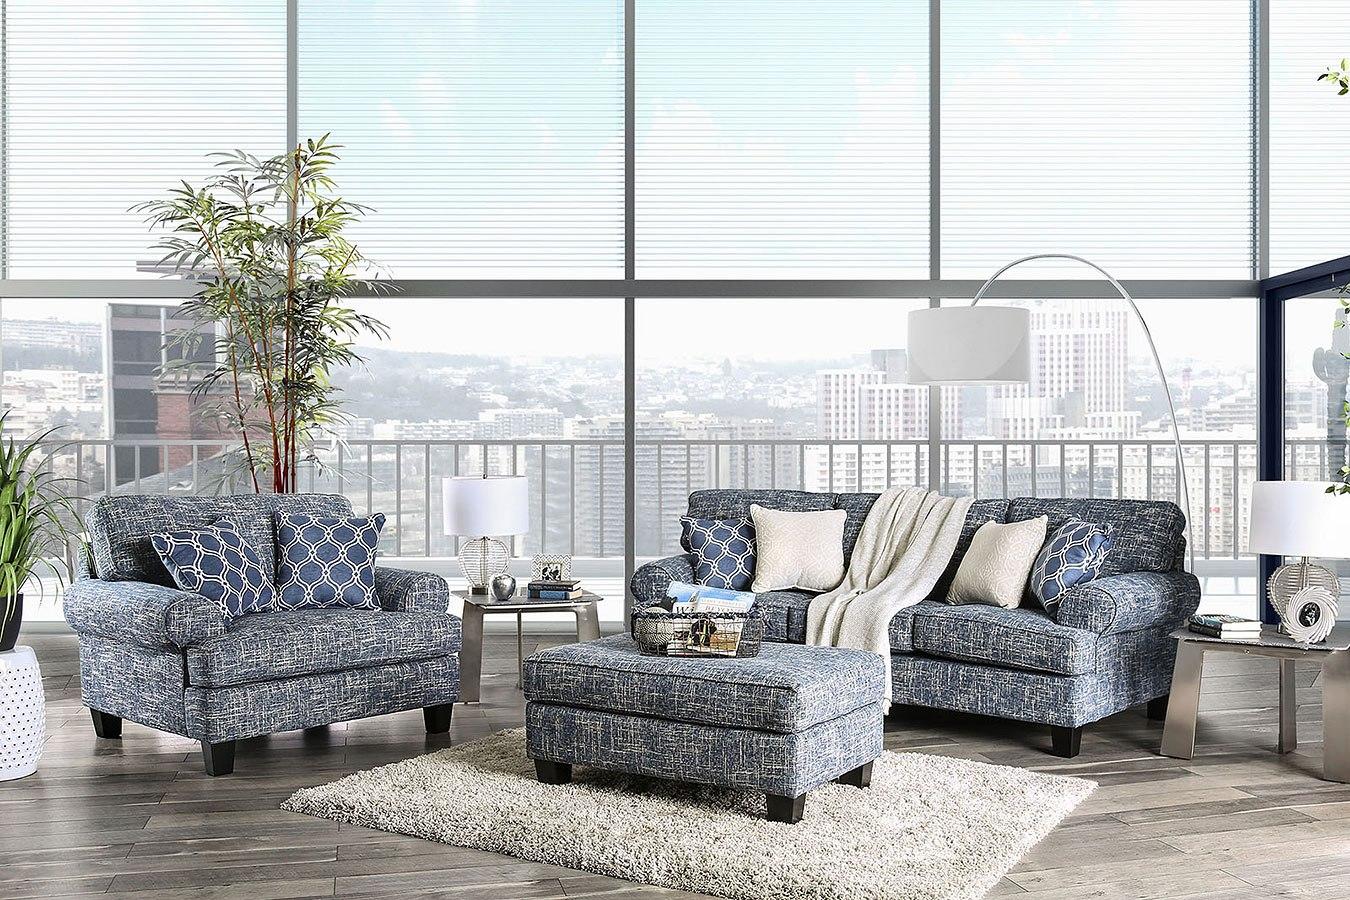 Transitional Sofa Chair and Ottoman SM8010-3PC Pierpont SM8010-3PC in Blue 